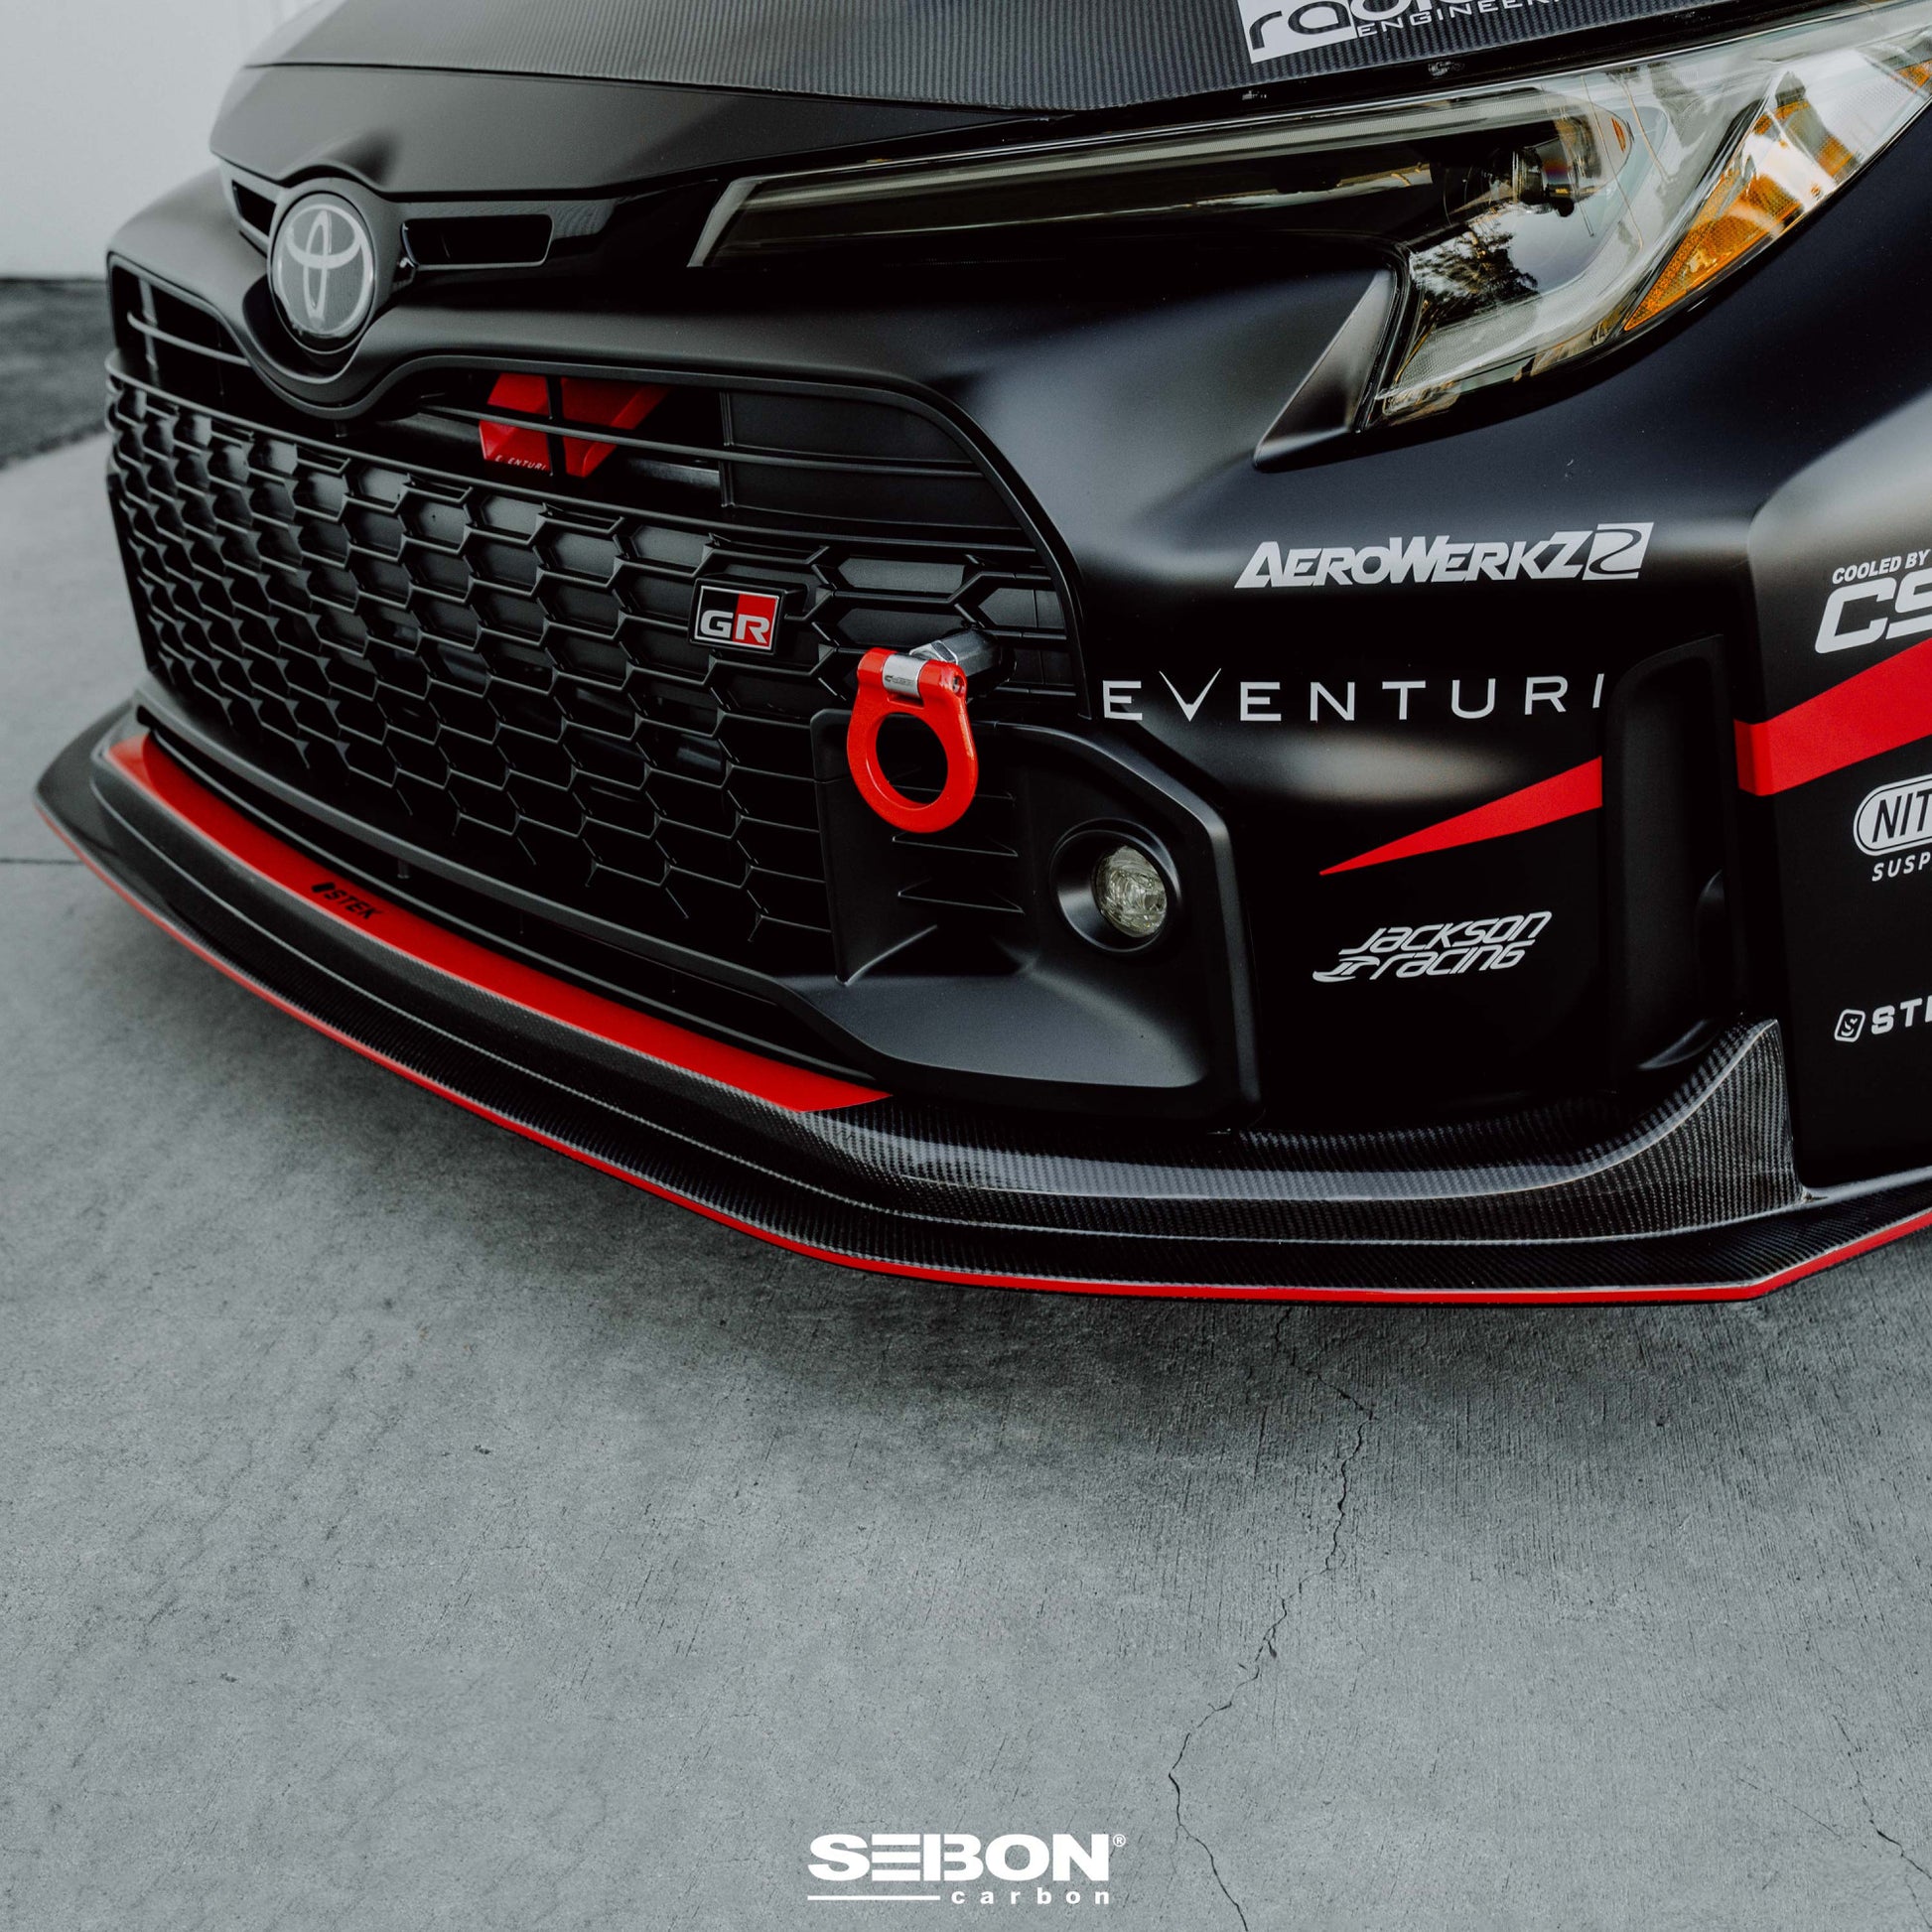 


Seibon Carbon components are carefully hand-crafted using only the finest materials. Our production team offers superior craftsmanship with over 20 years of experFront LipSeibon Carbon